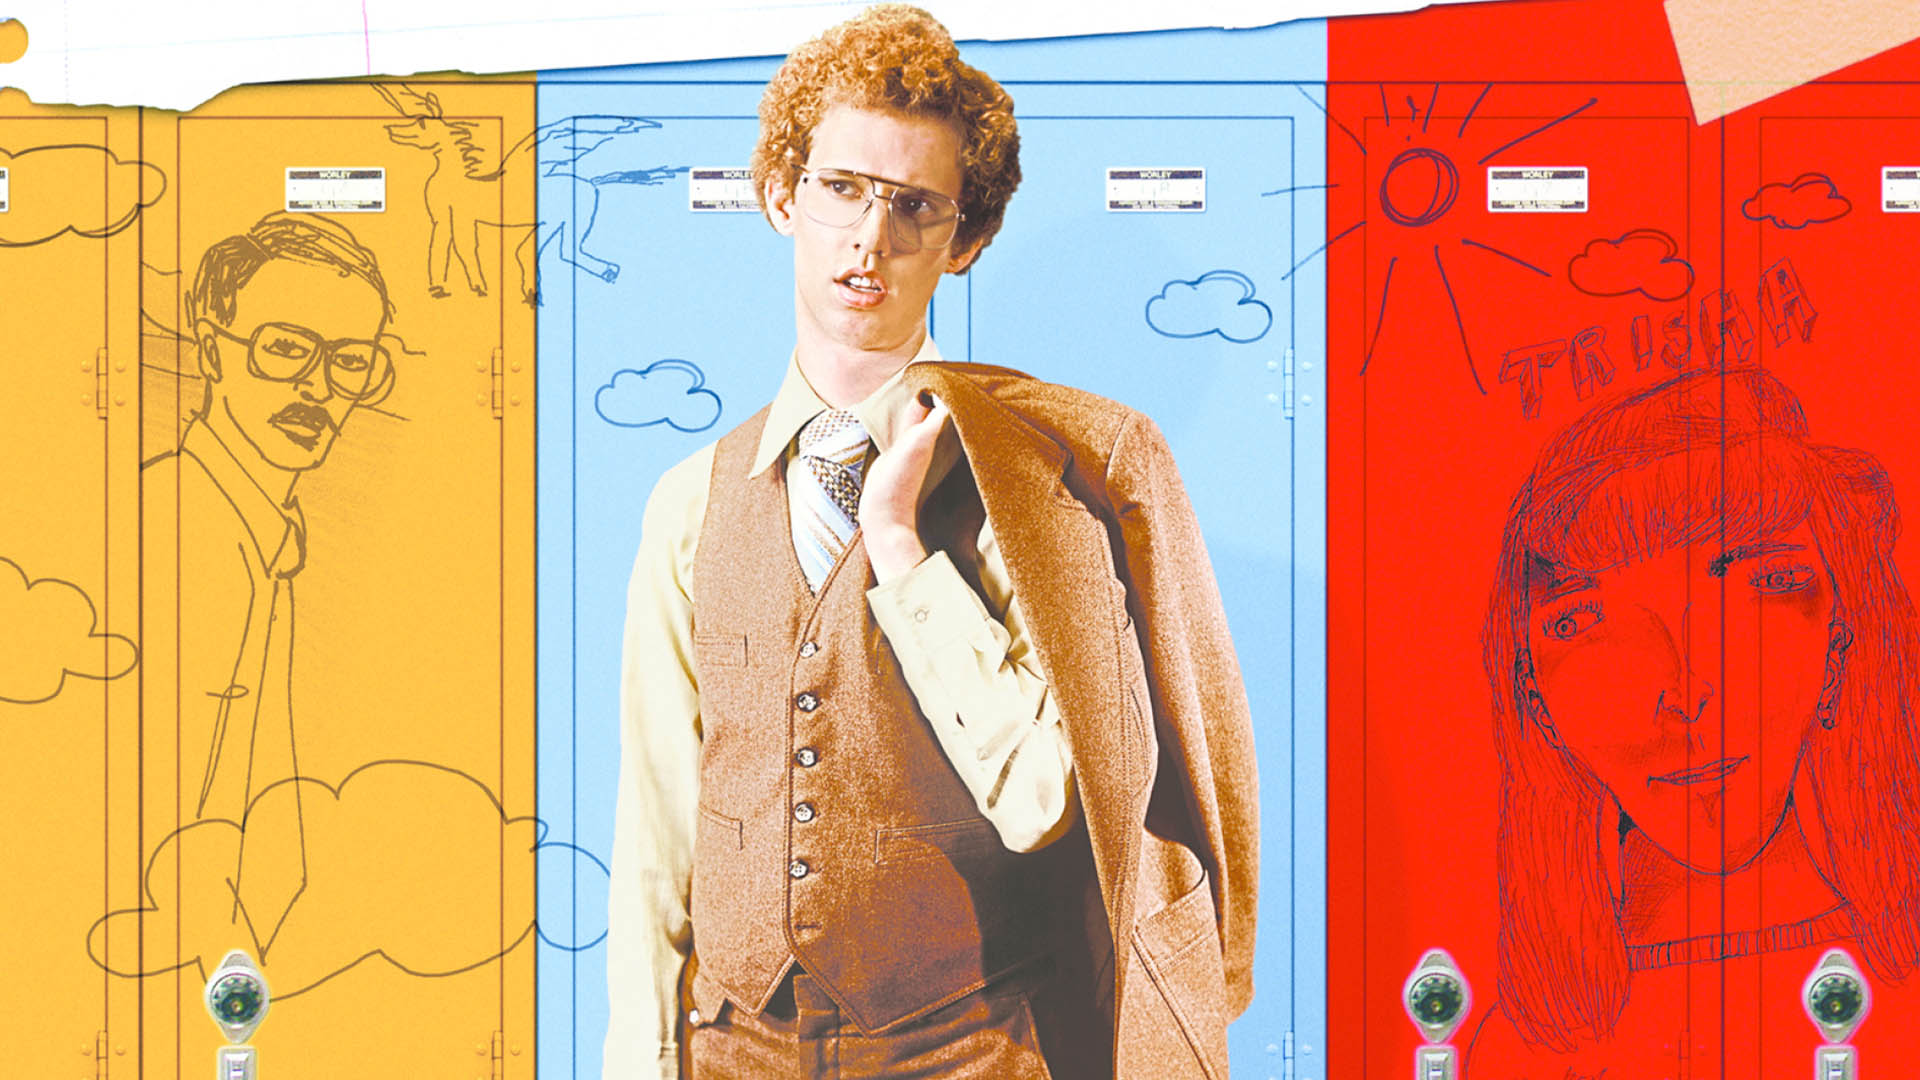 Napoleon Dynamite film cover in blue, yellow and red with its main character